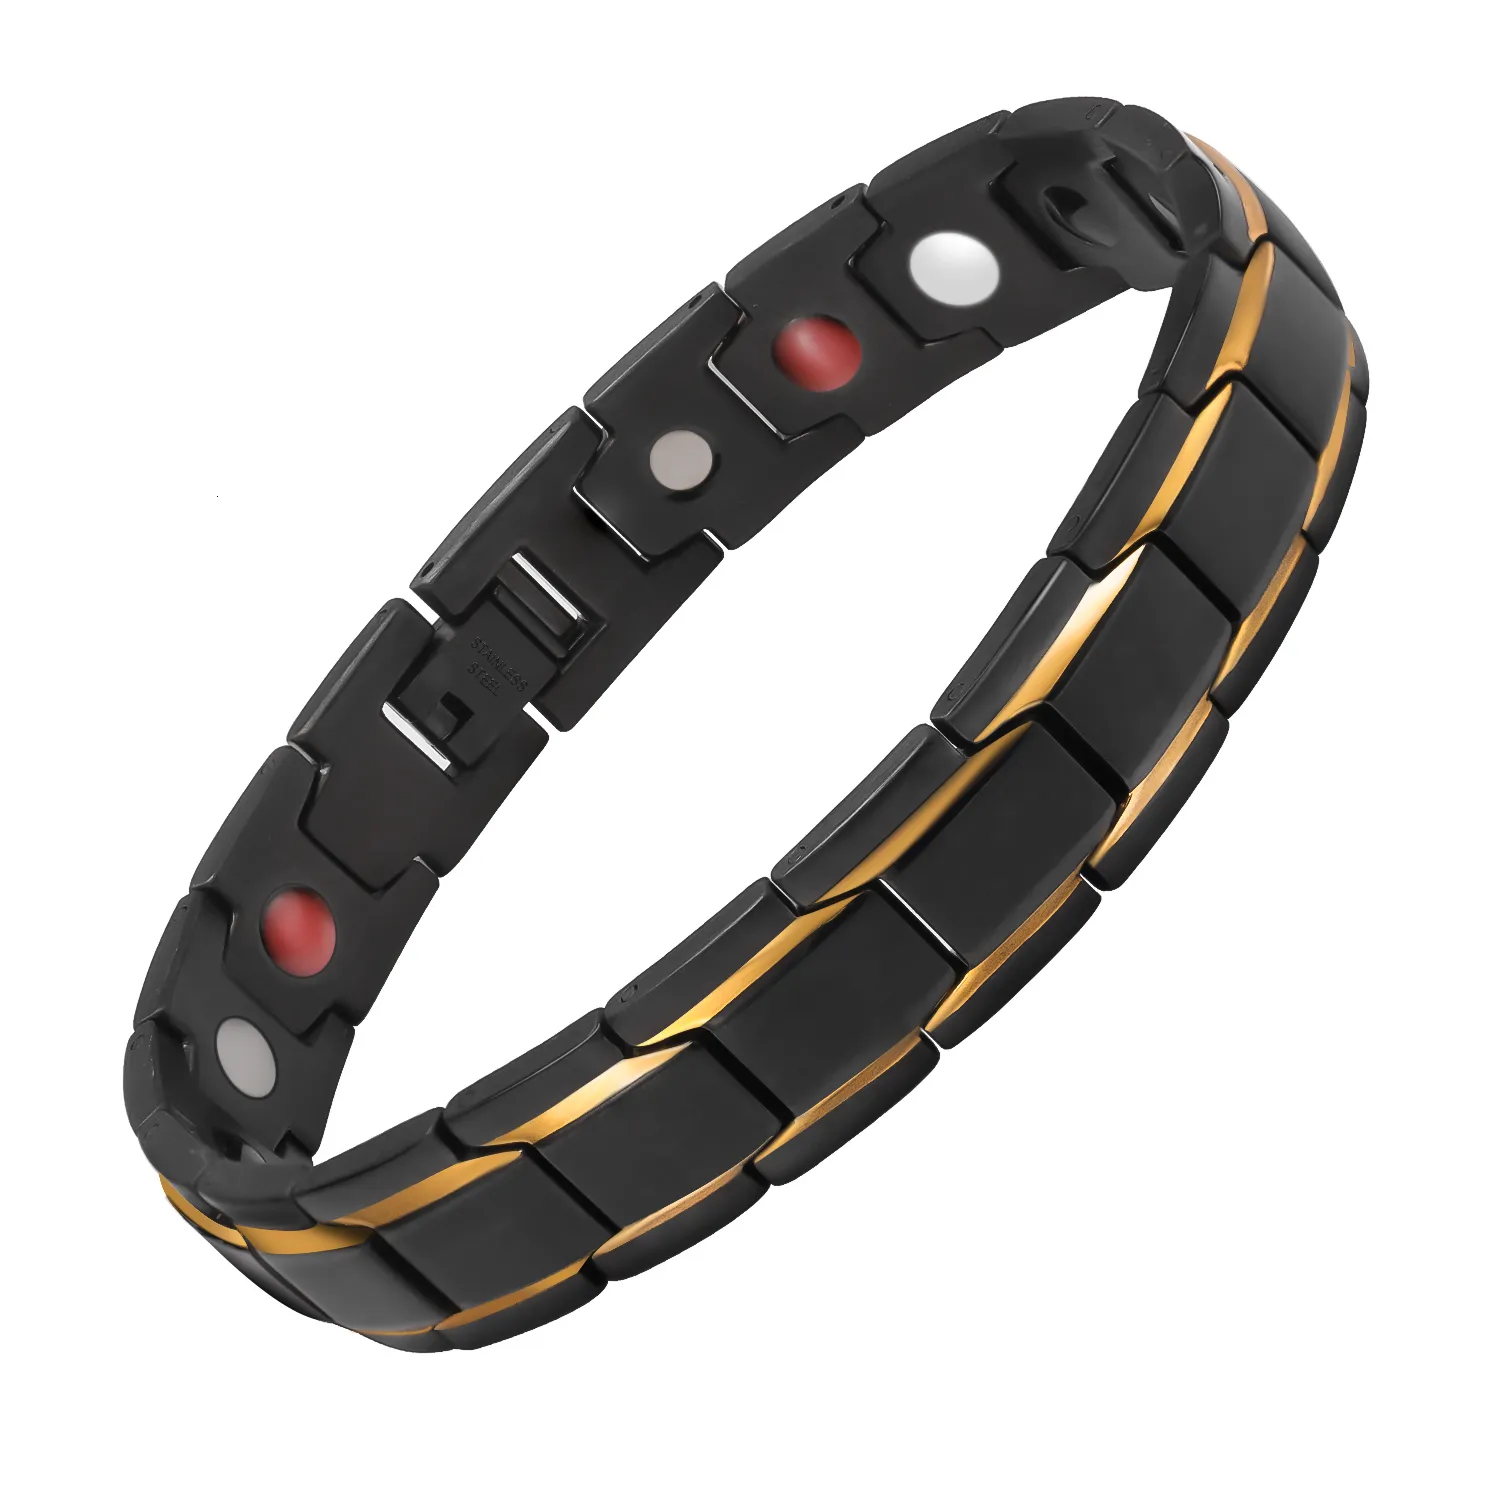 Mens Health Energy Bracelet Fashionable Black Stainless Steel Bio Magnetic  Ruby Jewelry From Ysm15800226919, $9.02 | DHgate.Com